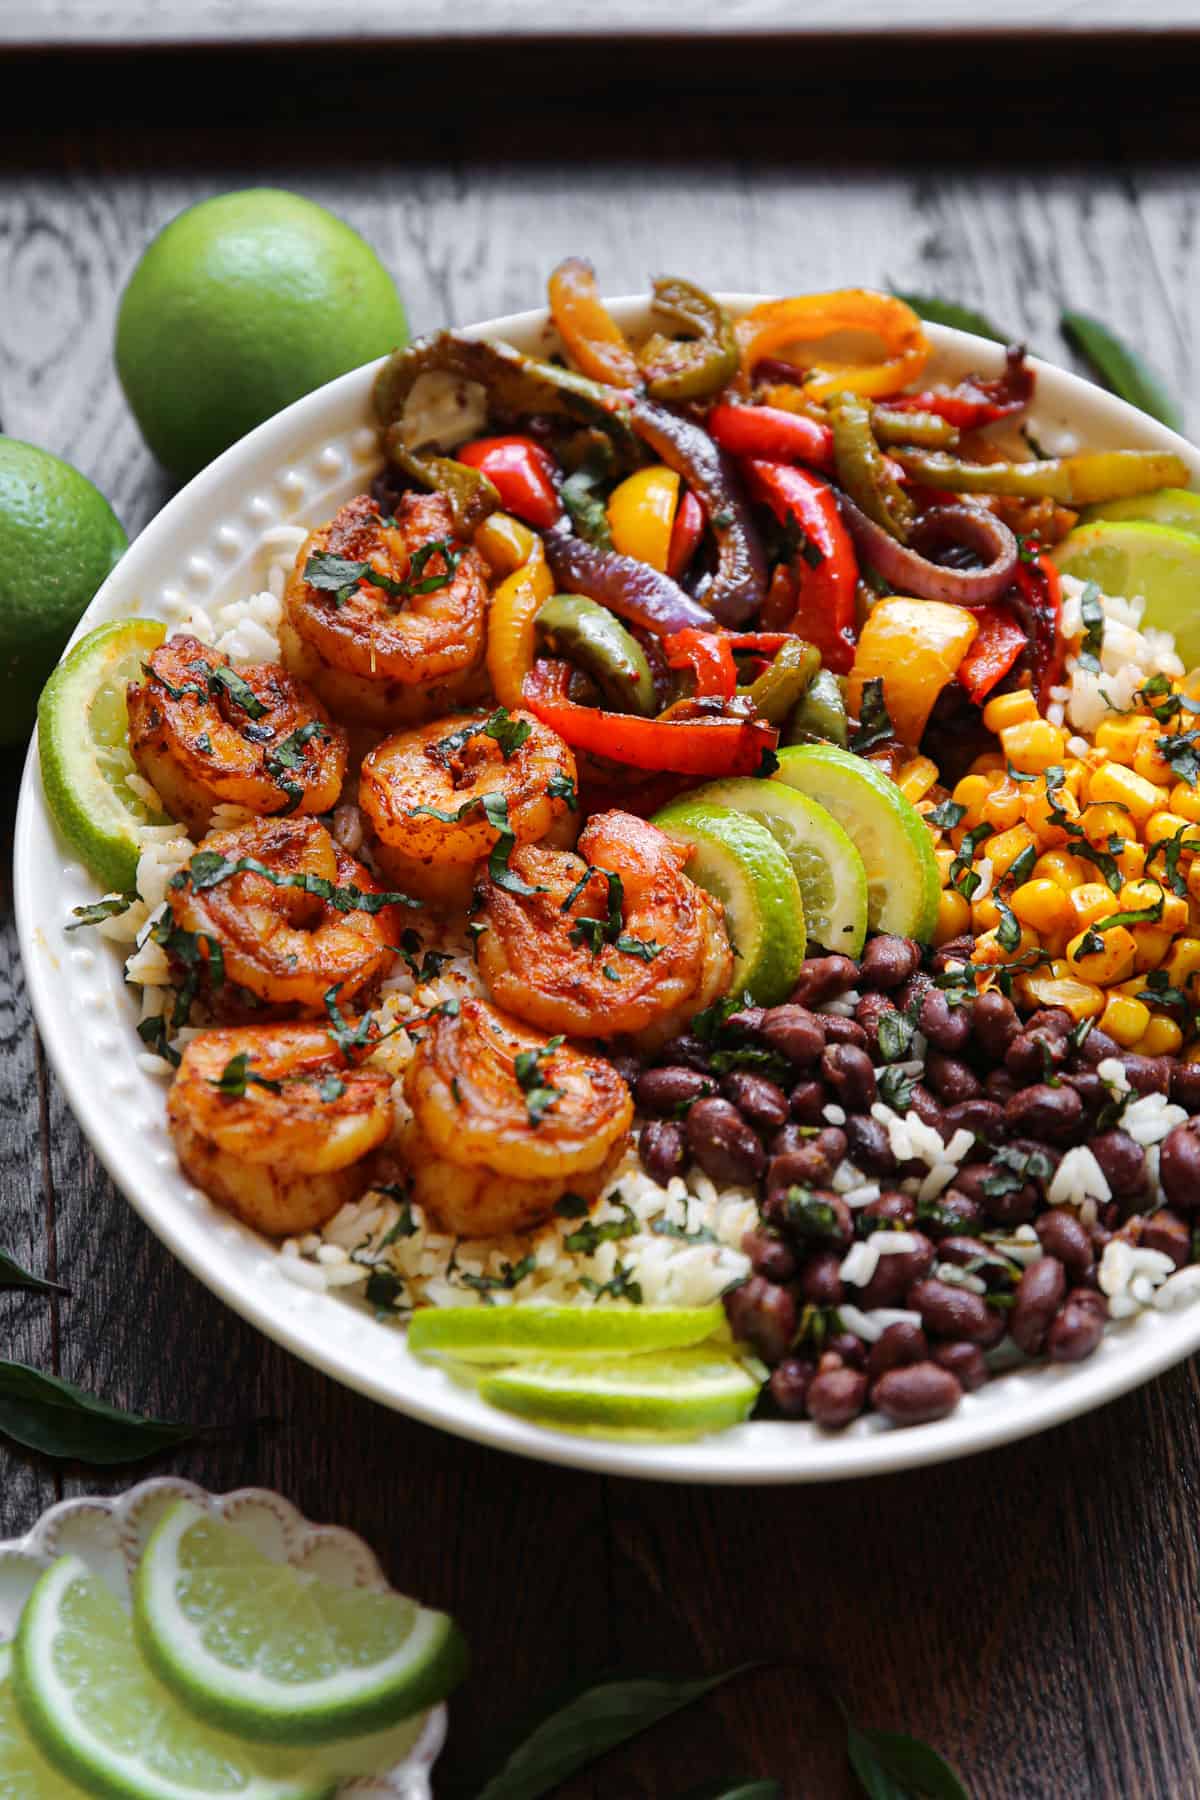 Shrimp Fajita bowl with bell peppers, red onions, black beans, corn, rice, and lime slices.